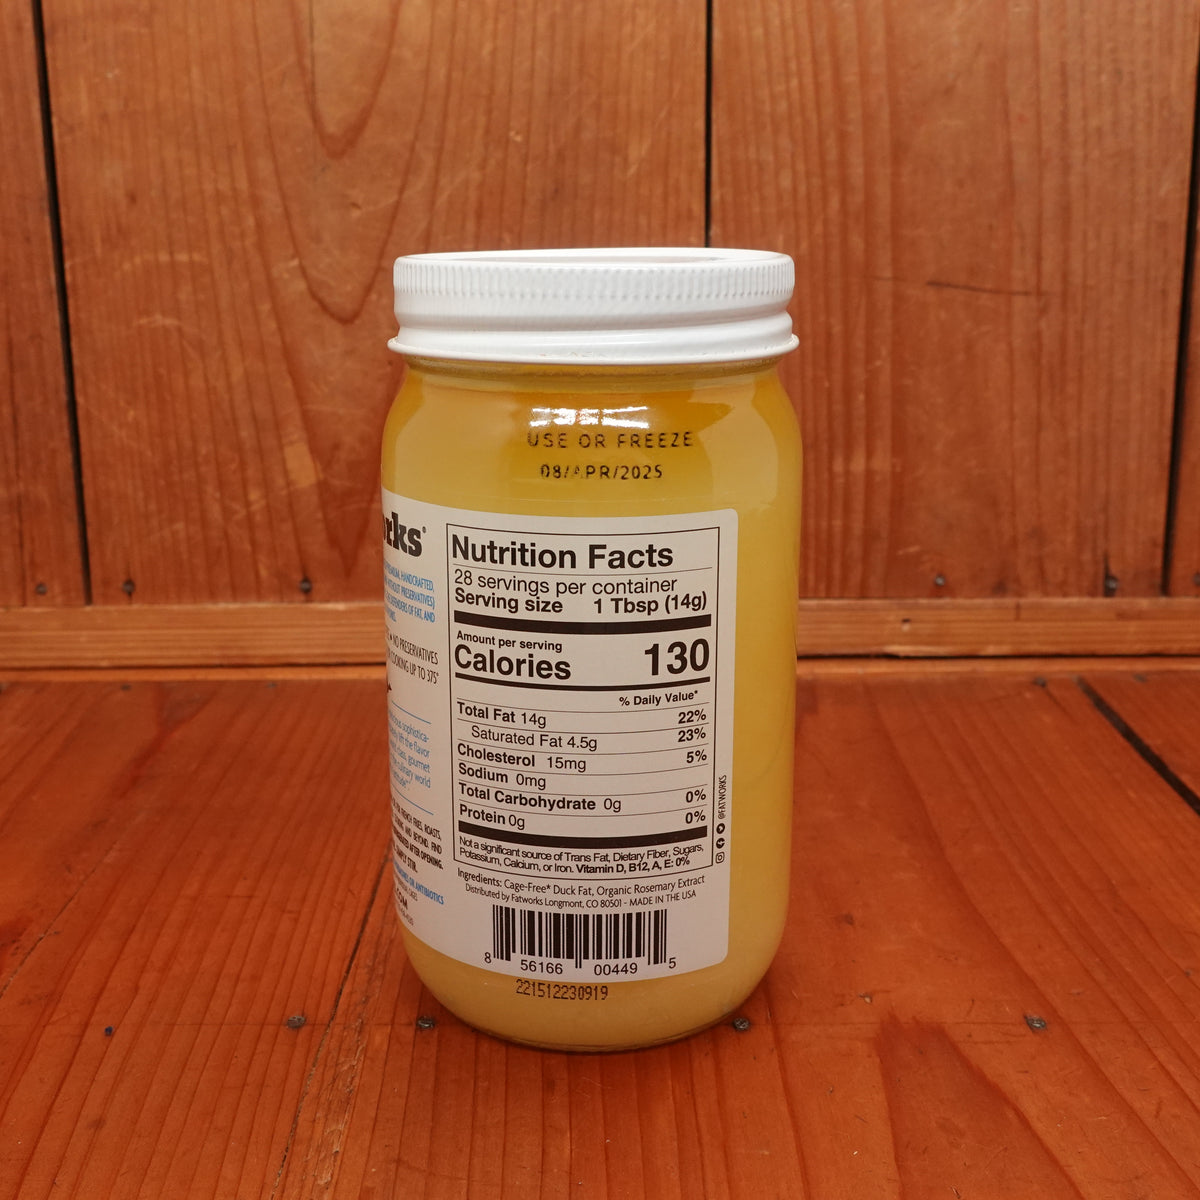 Fatworks Cage Free Duck Fat - 14oz